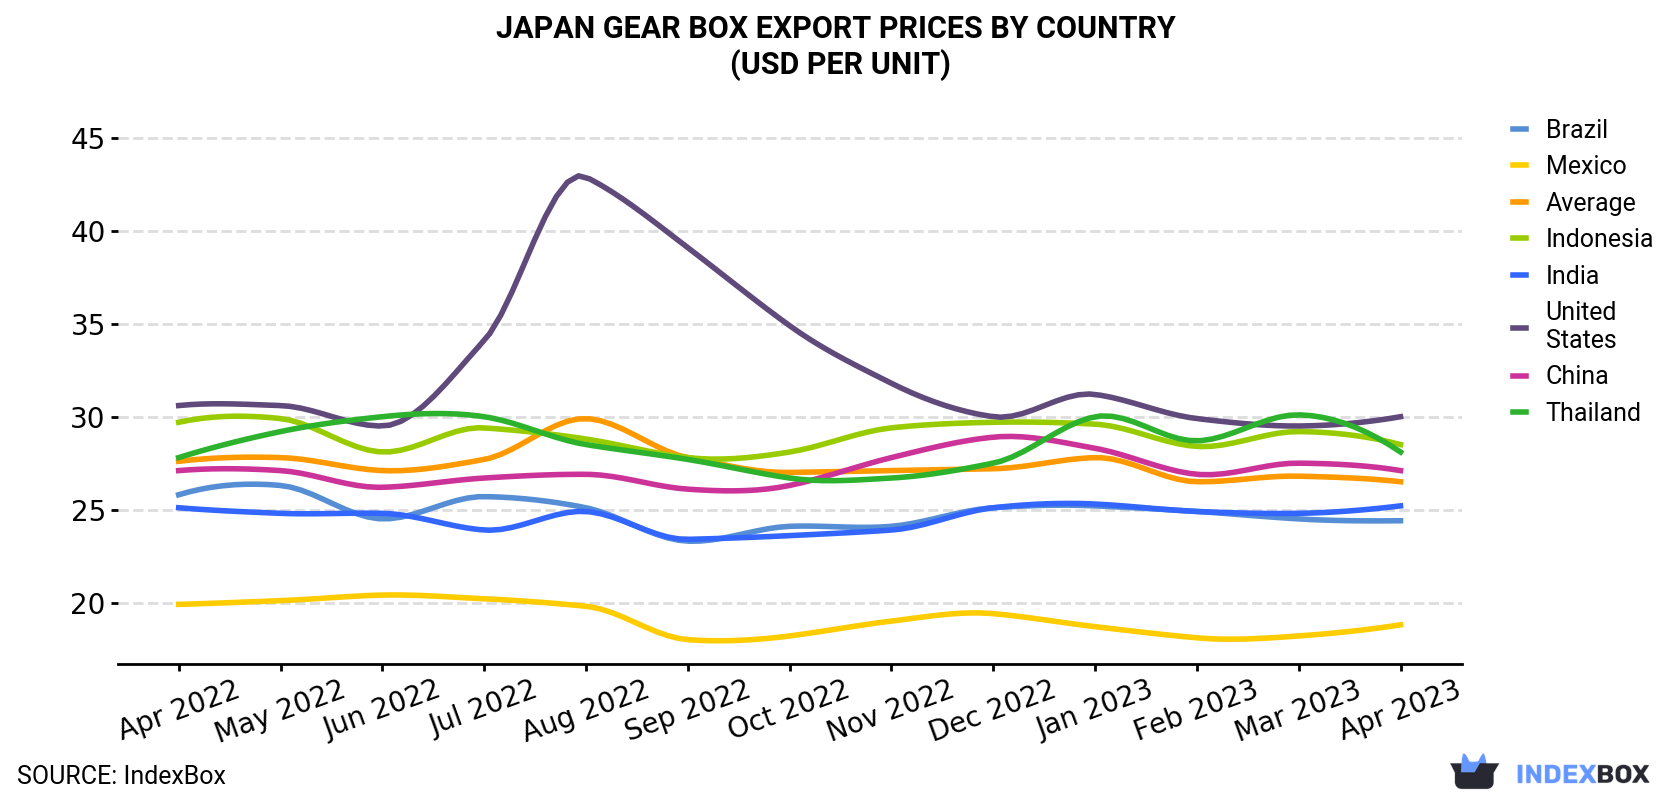 Japan Gear Box Export Prices By Country (USD Per Unit)